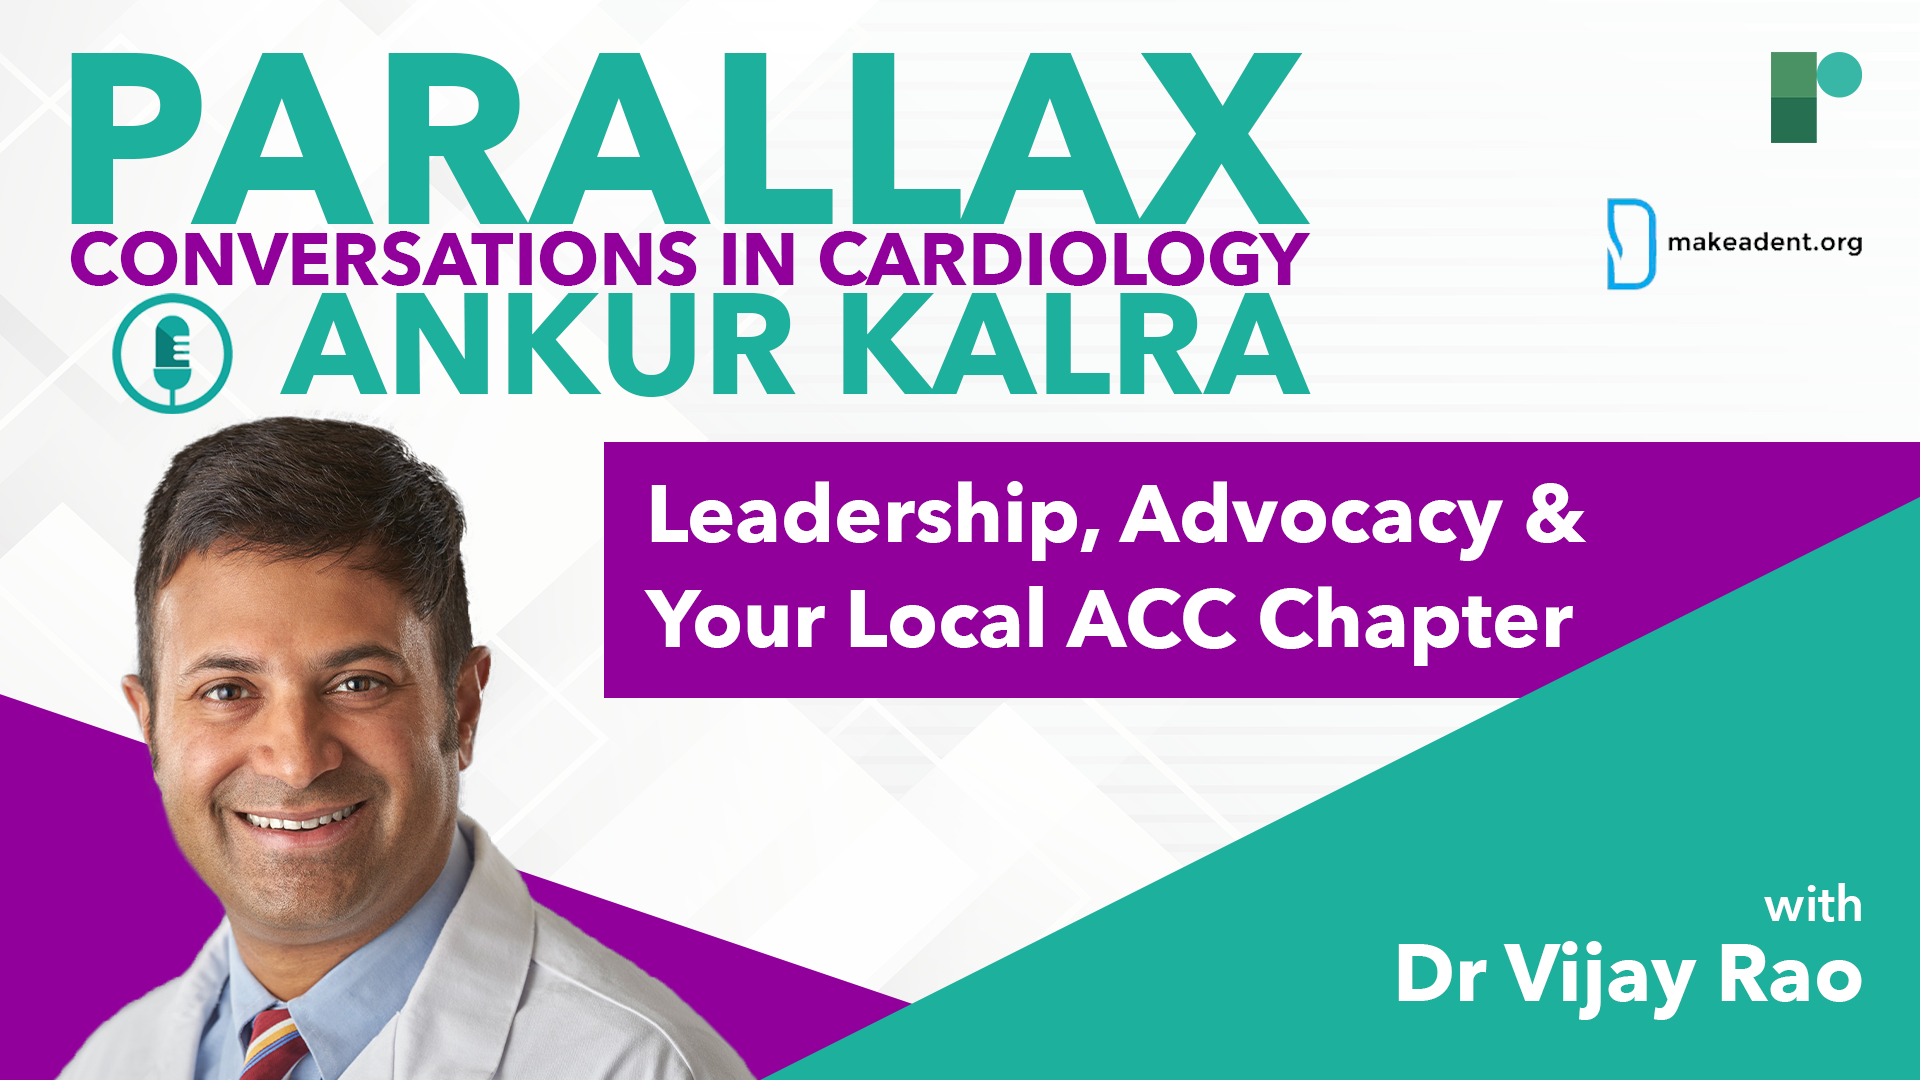 Ep 88: Leadership, Advocacy & Involvement in Your Local ACC Chapter with Dr Vijay Rao